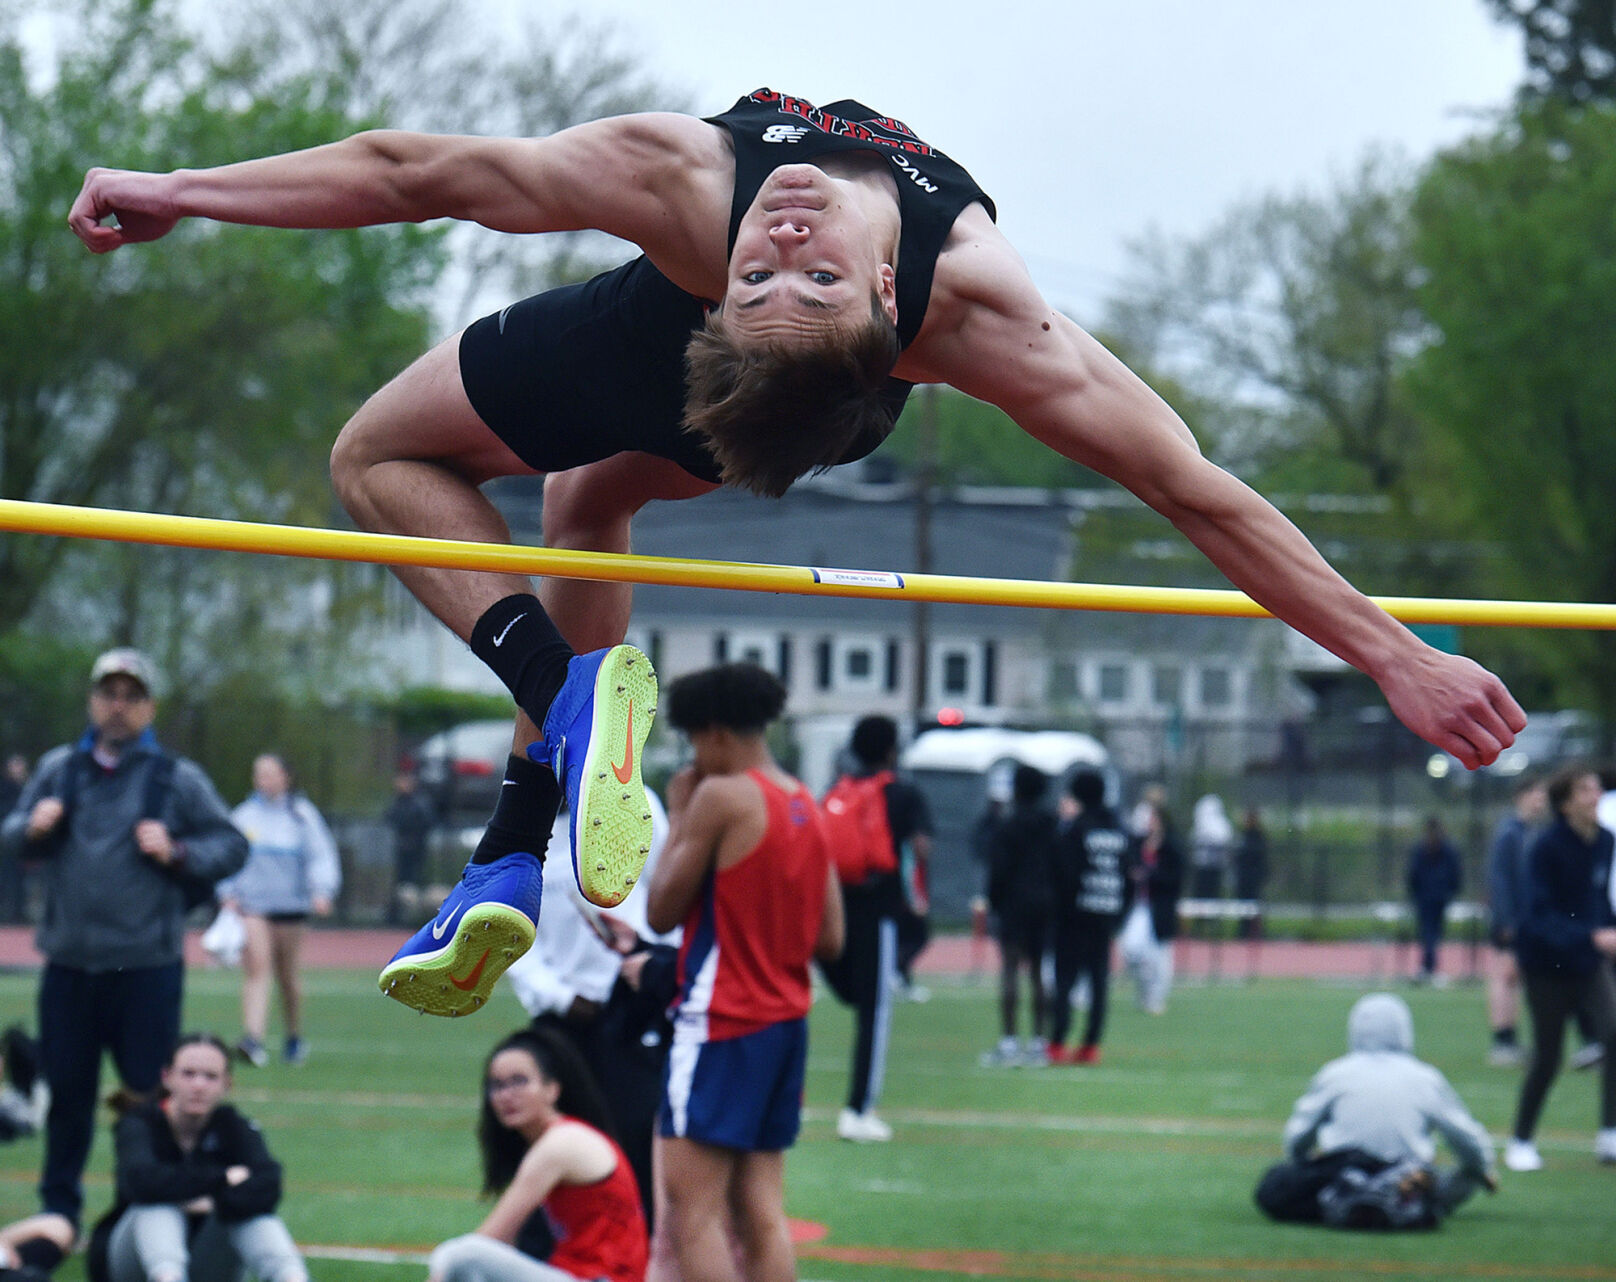 High School Roundup: Behind relay record, North Andover boys clinch MVC title